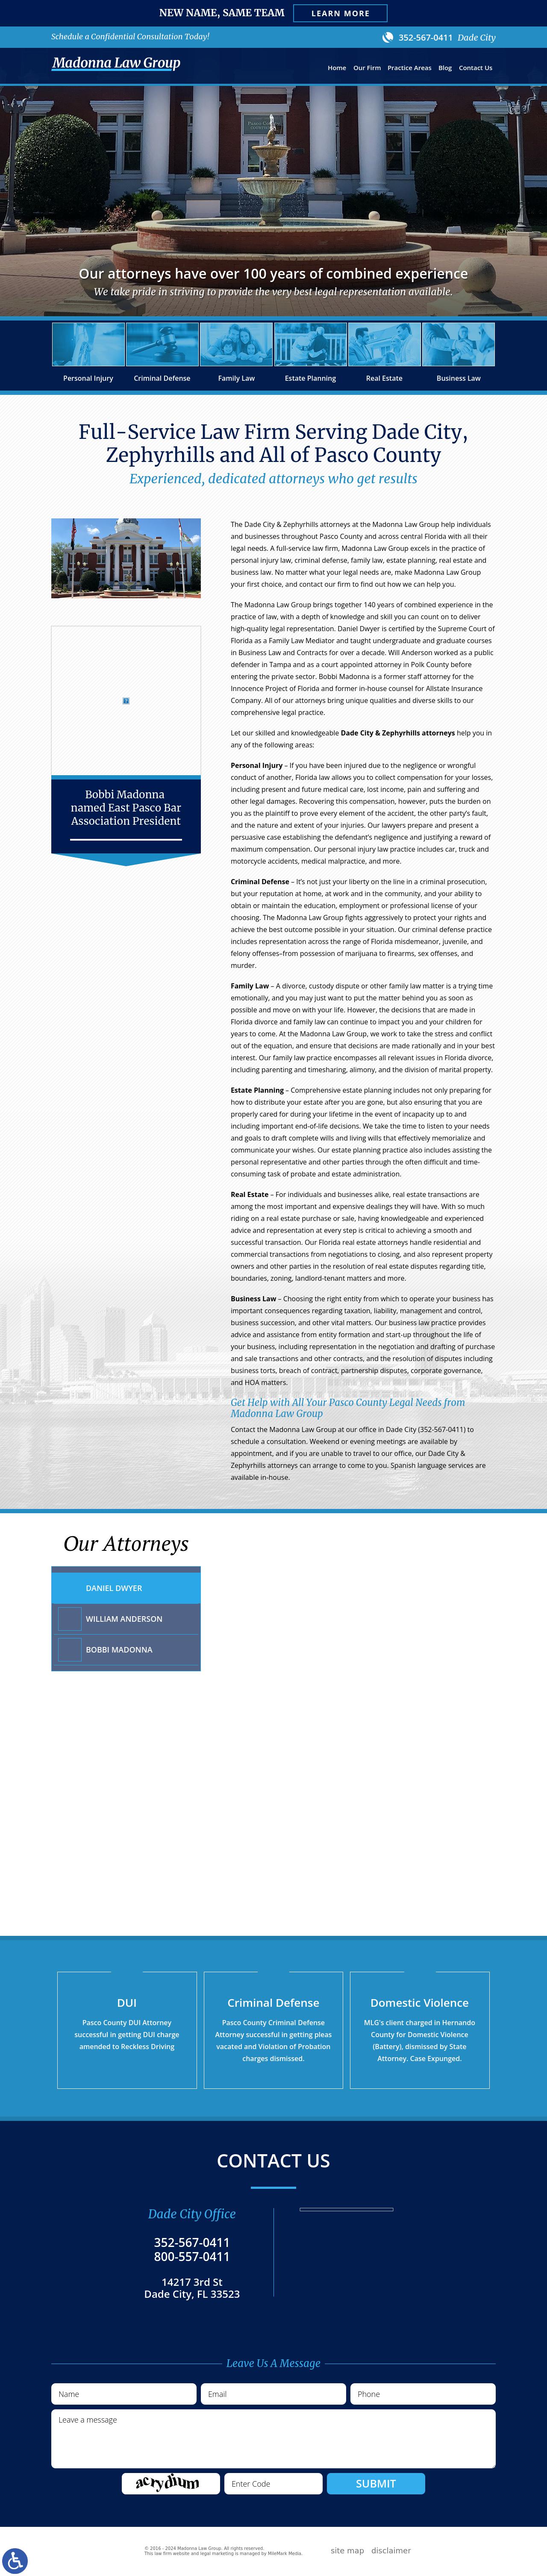 Mander Law Group - Dade City FL Lawyers